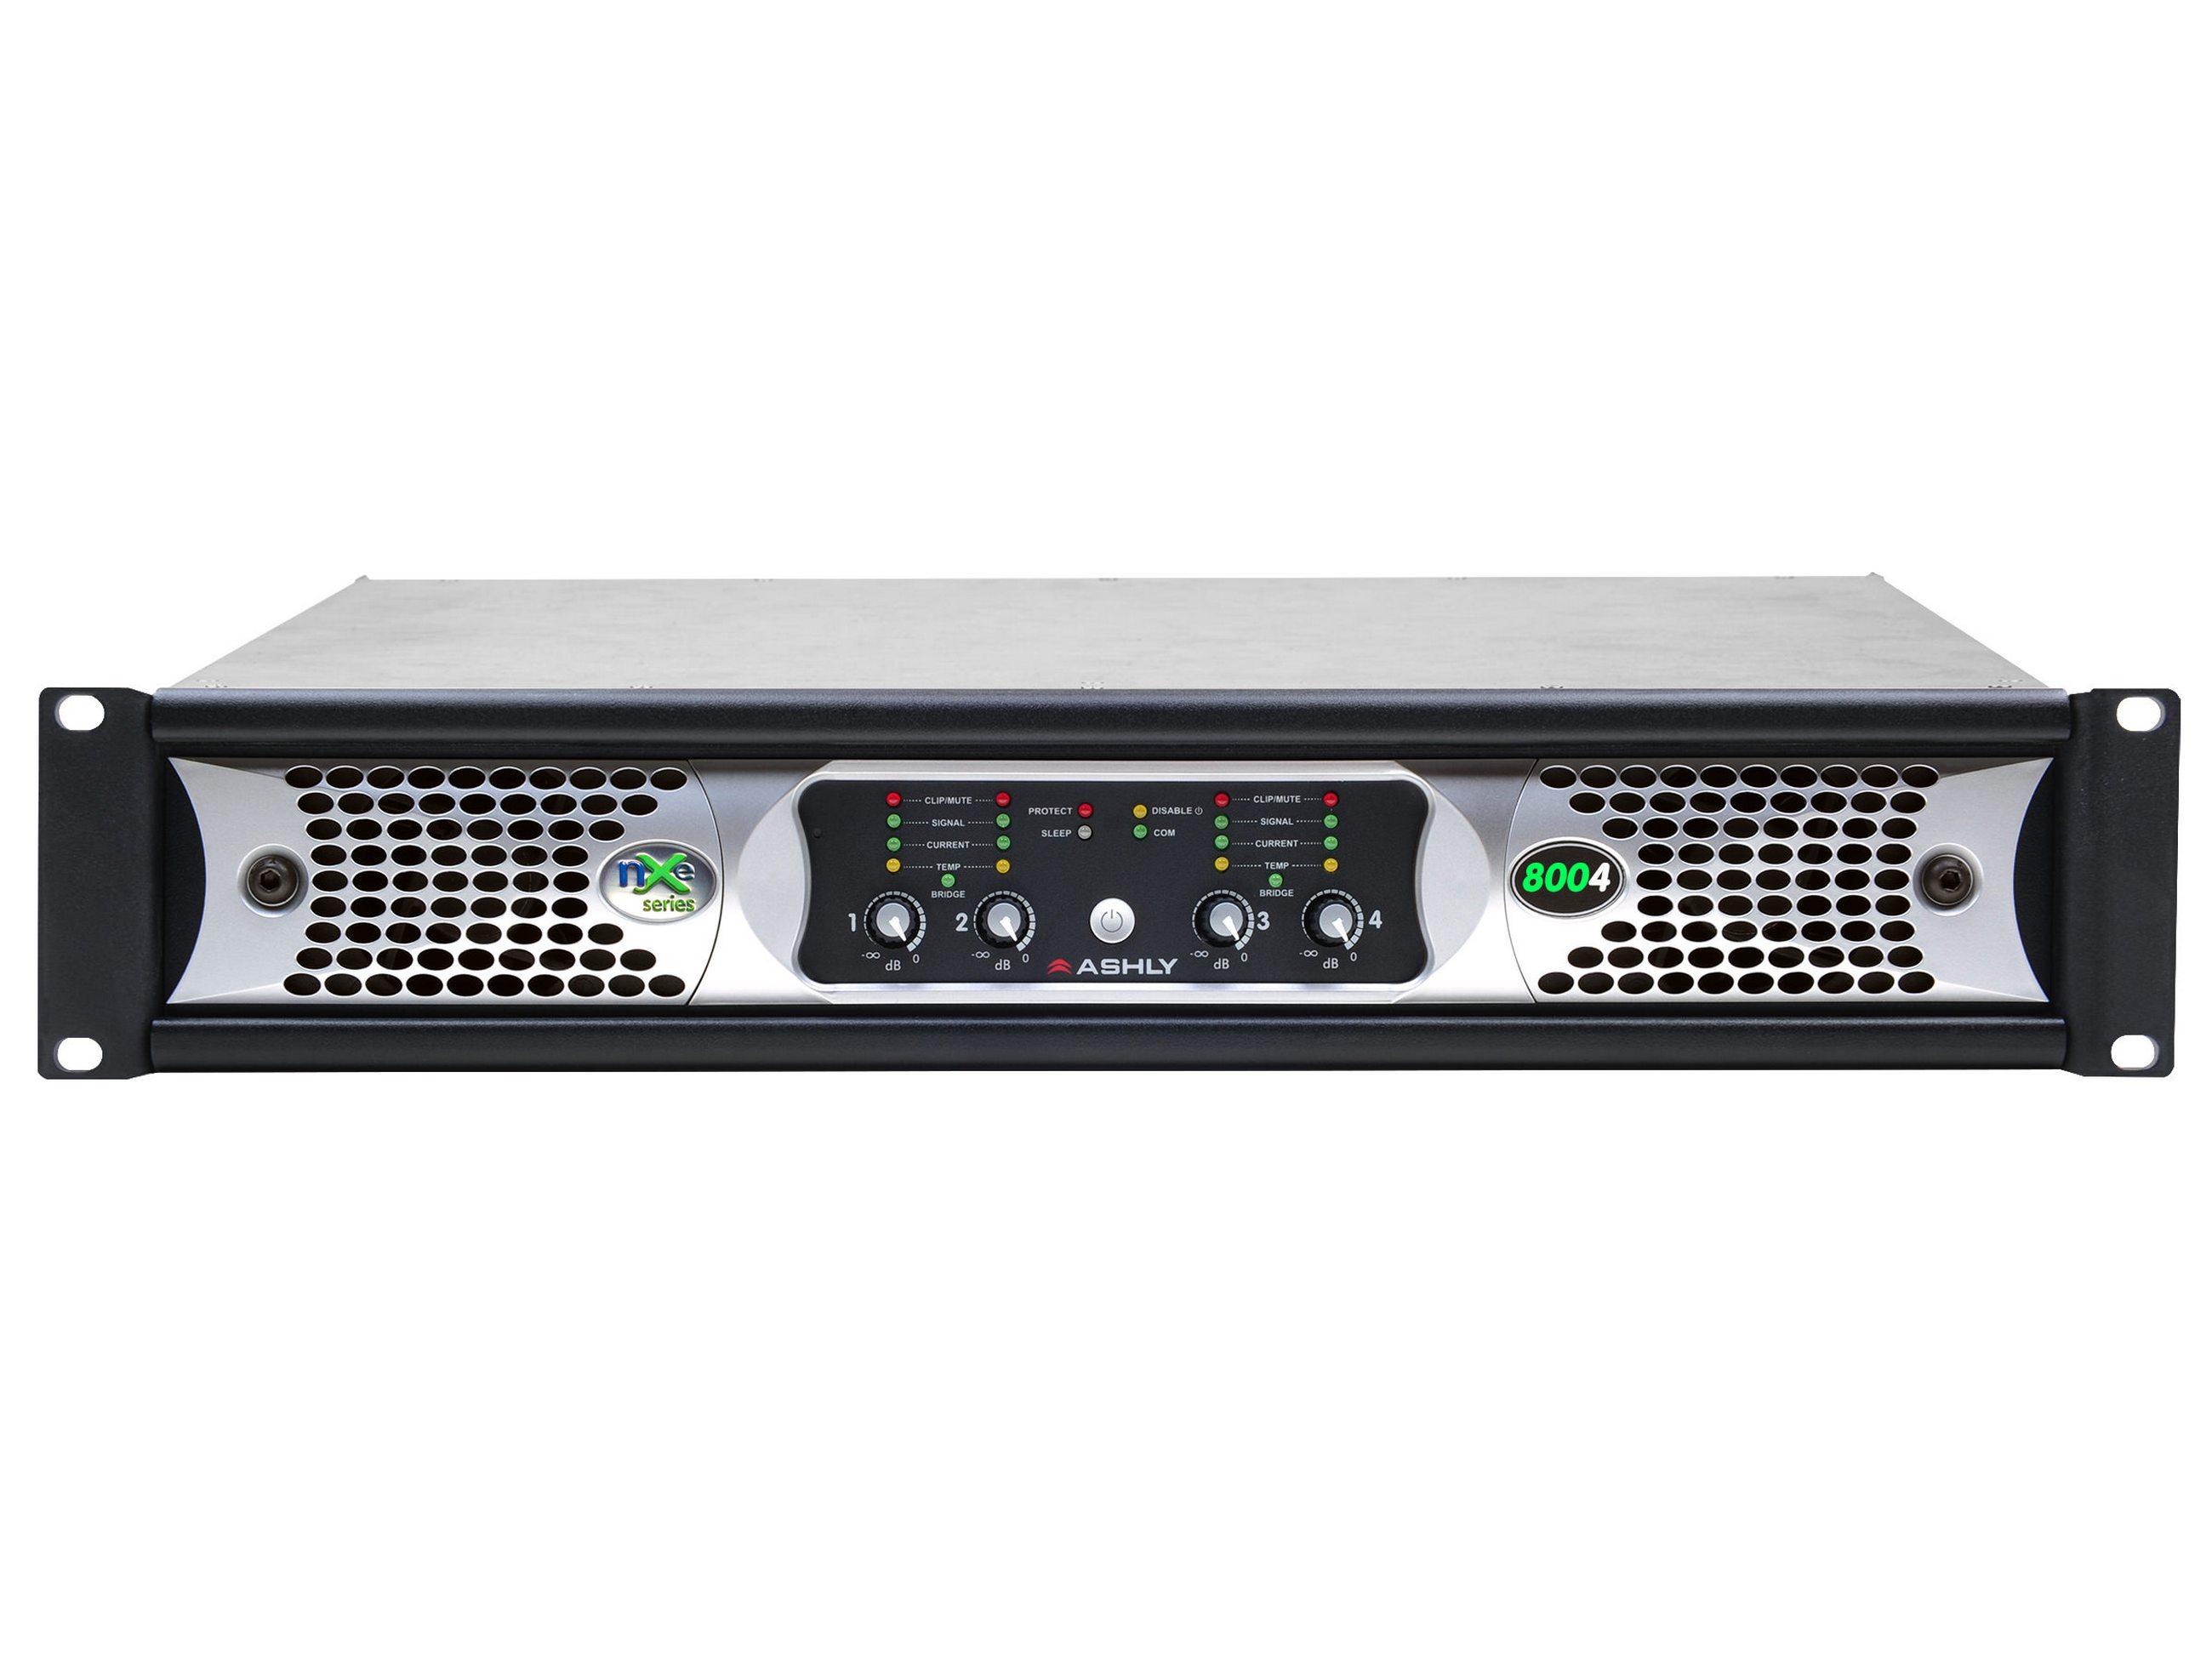 nXe8004bd 4x 800 Watts/2 Ohms Network Power Amplifier with OPDante and OPDAC4 Option Cards by Ashly